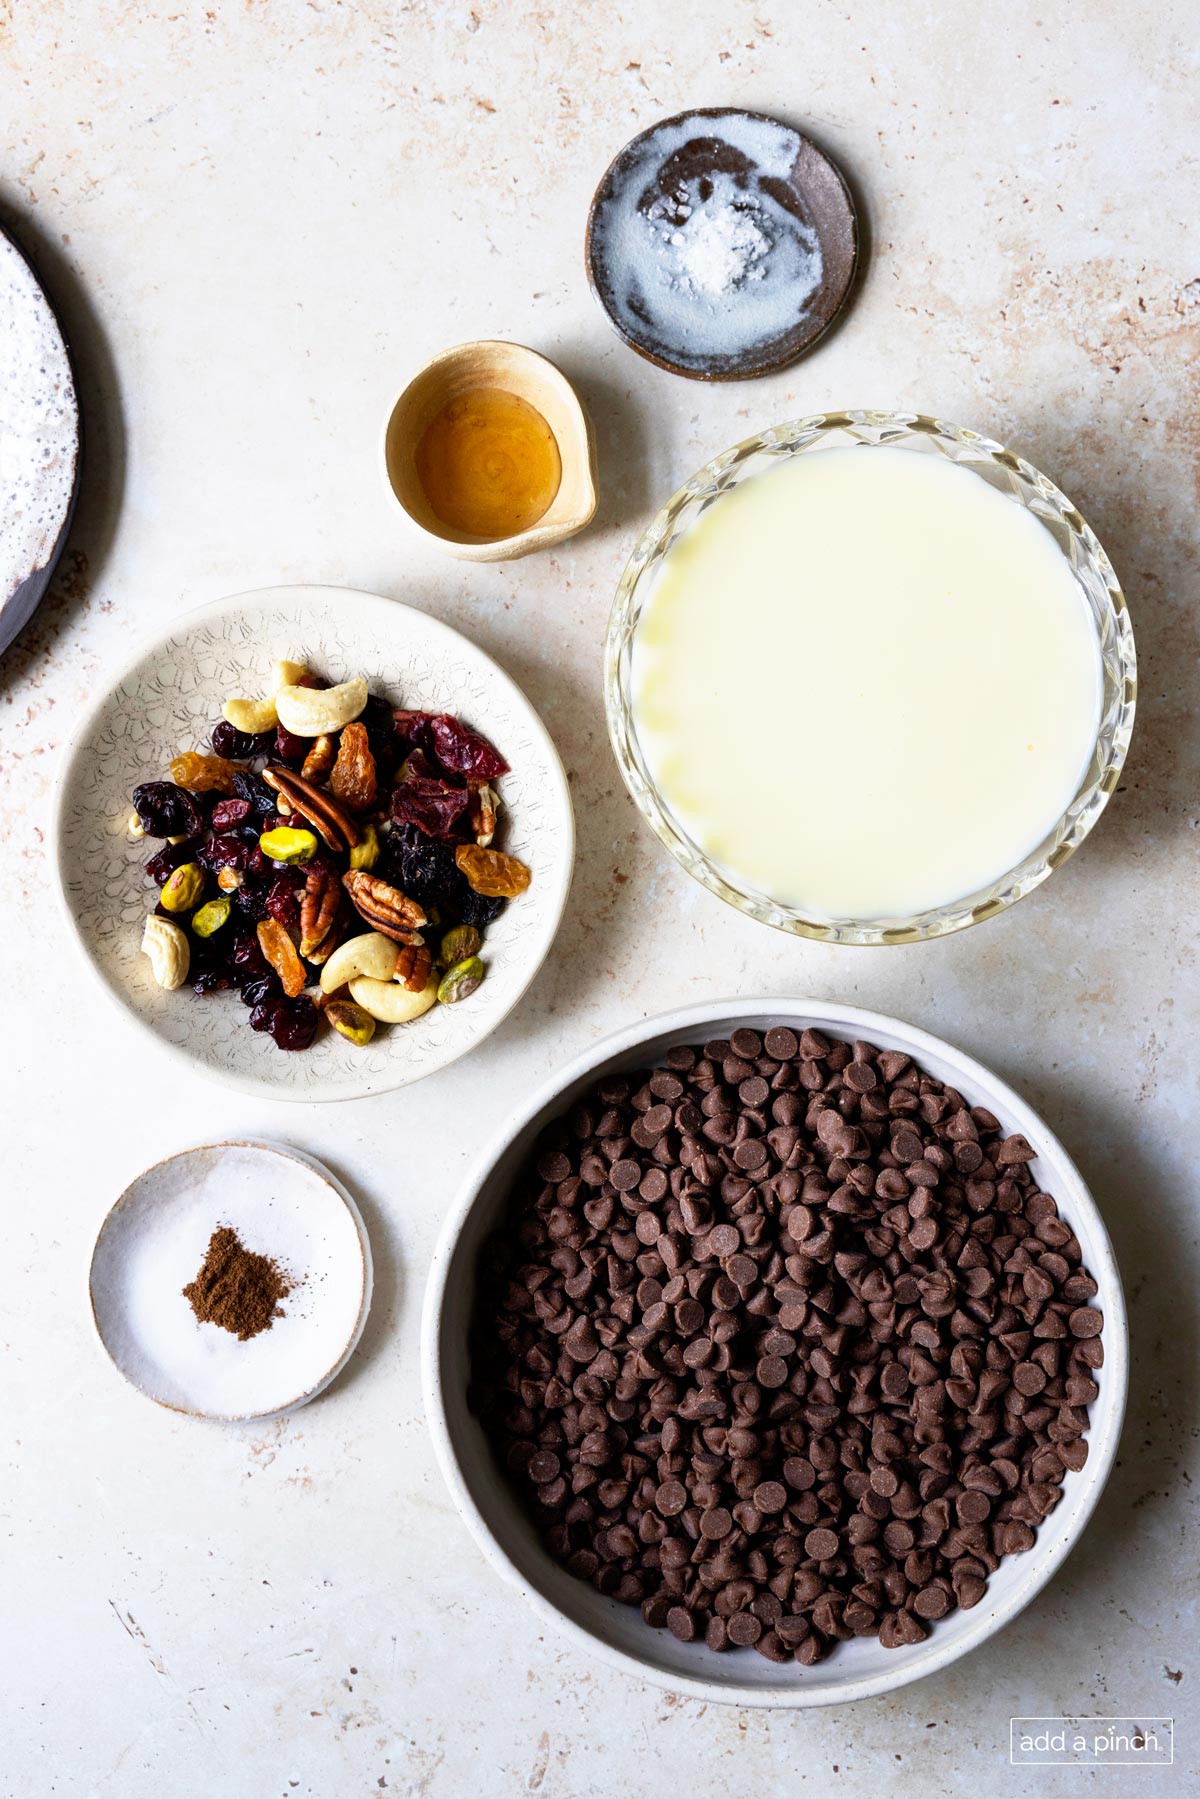 Photograph of ingredients used to make easy fudge: salt, vanilla extract, sweetened condensed milk, and chocolate chips. Also included in photograph are optional ingredients of mixed nuts and fruits and espresso powder.